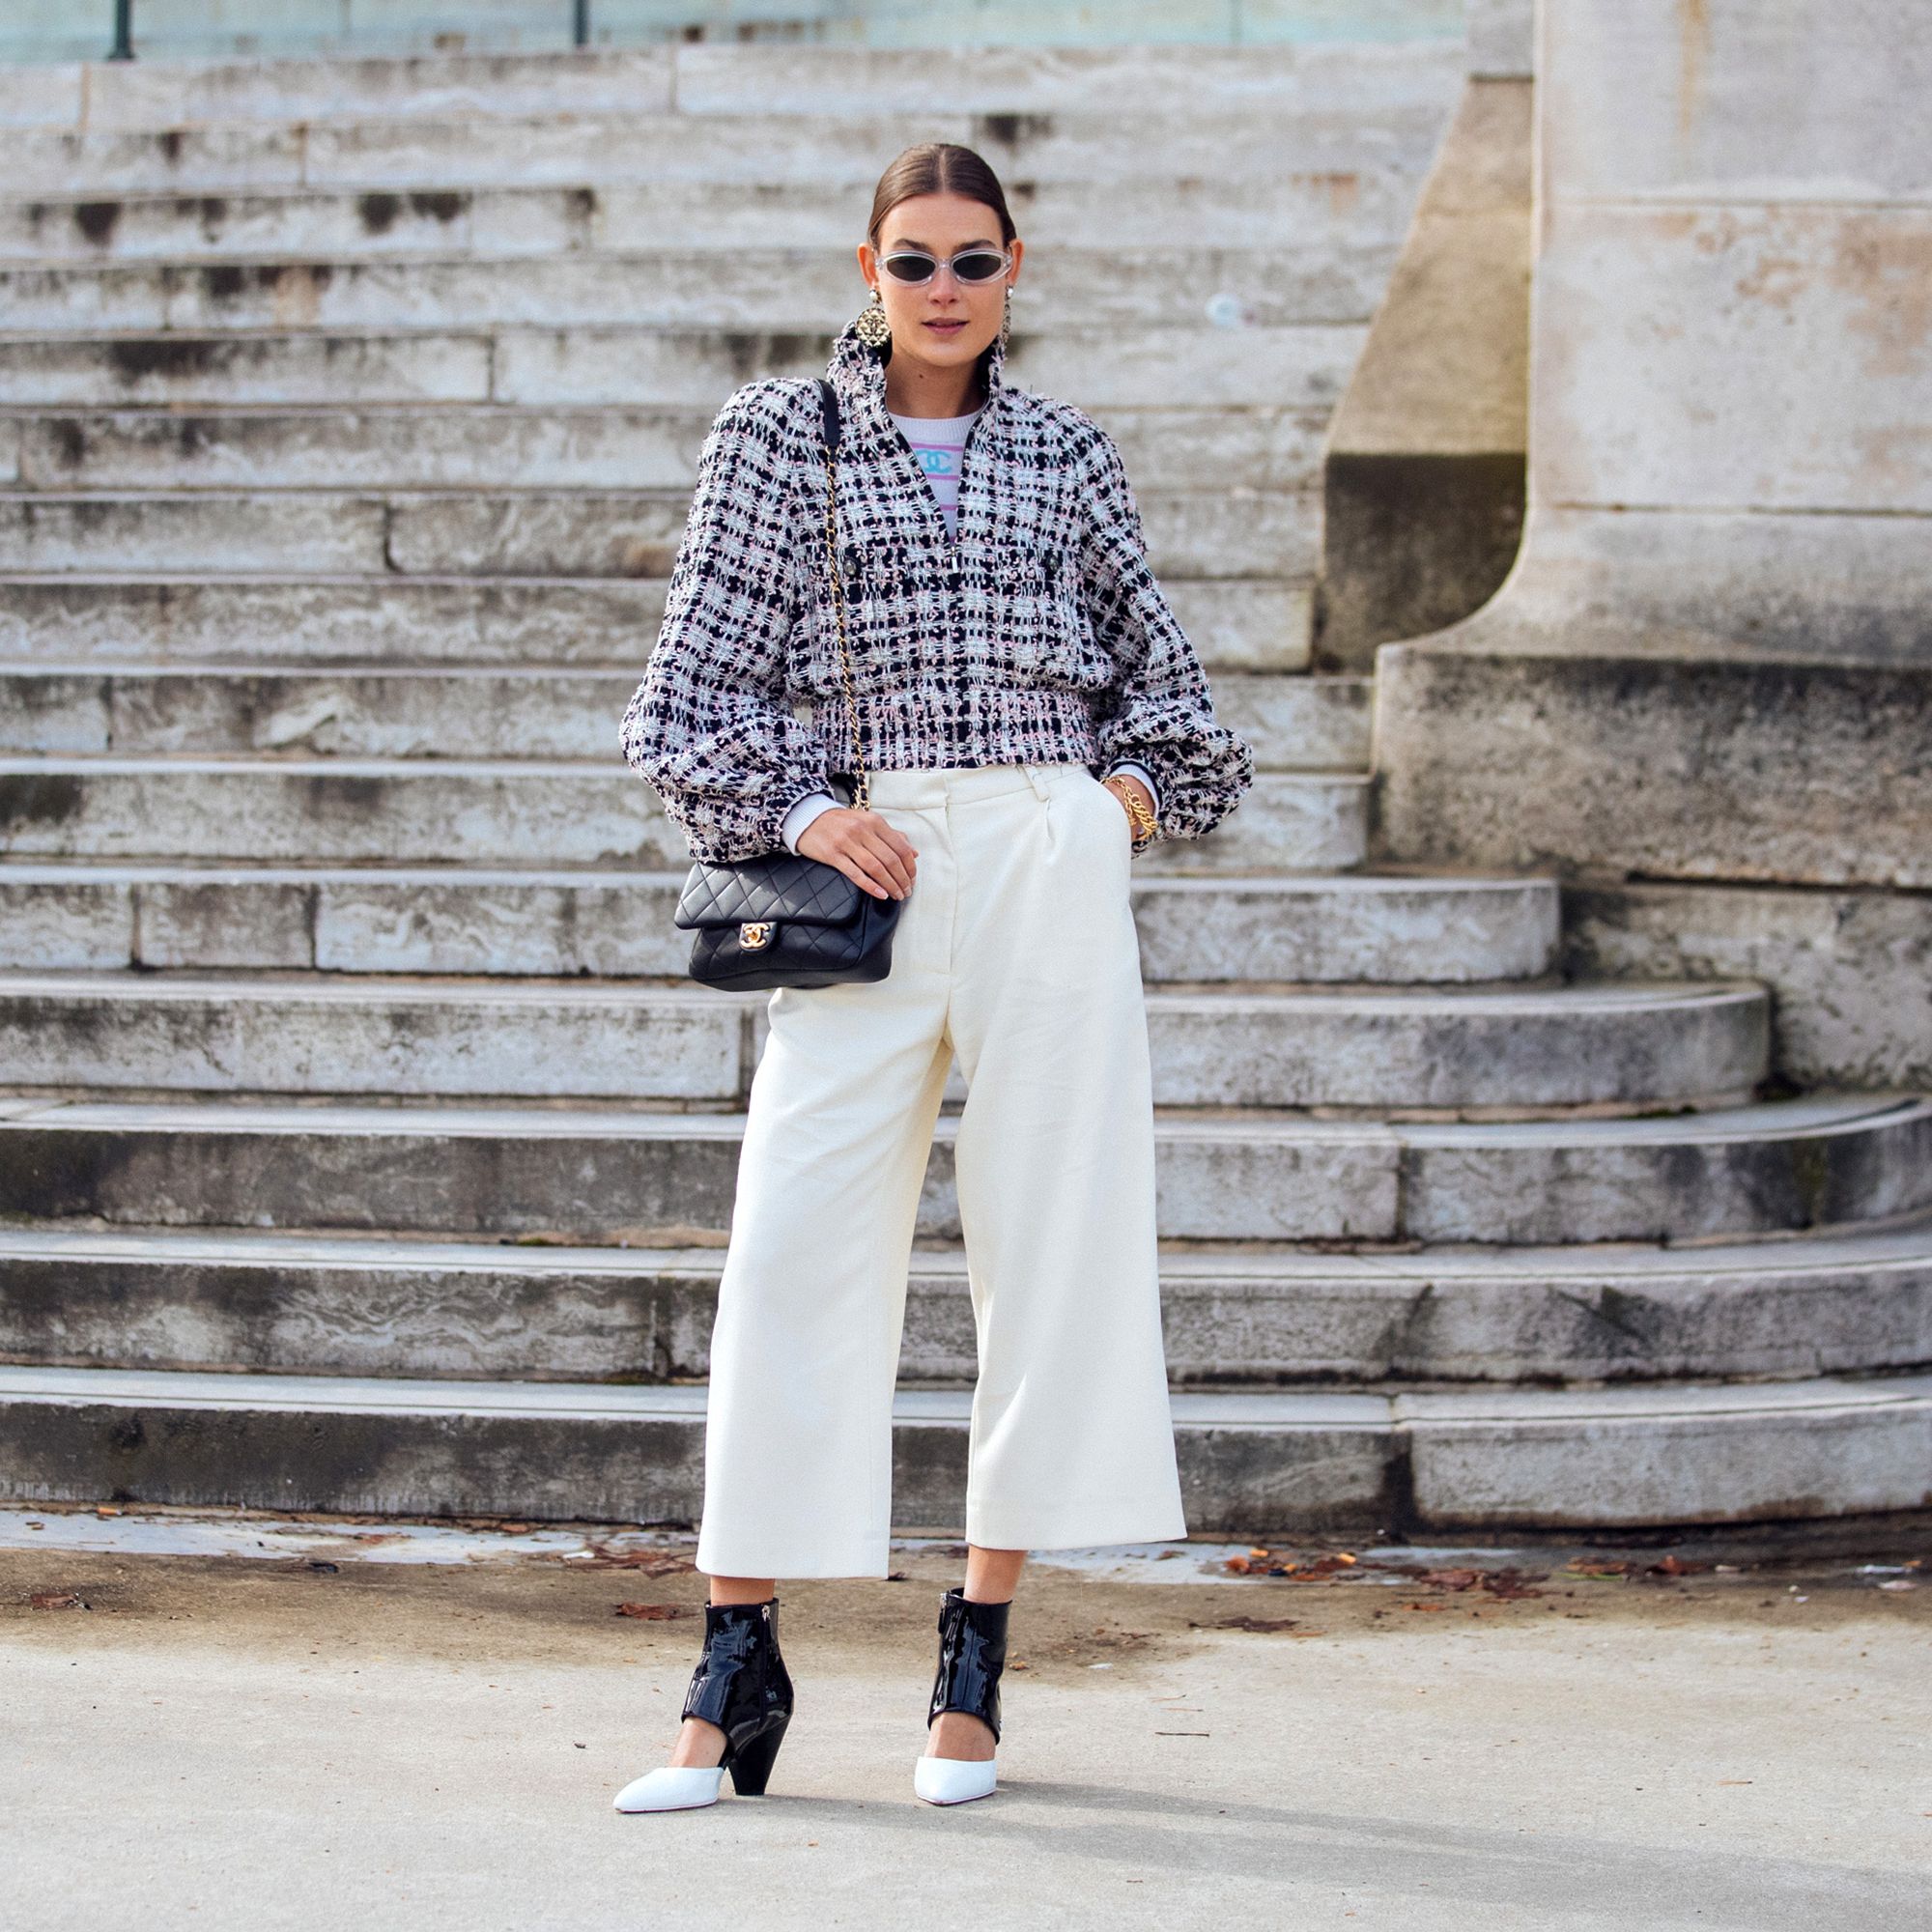 How to Wear Culottes, Palazzo Pants, Gauchos